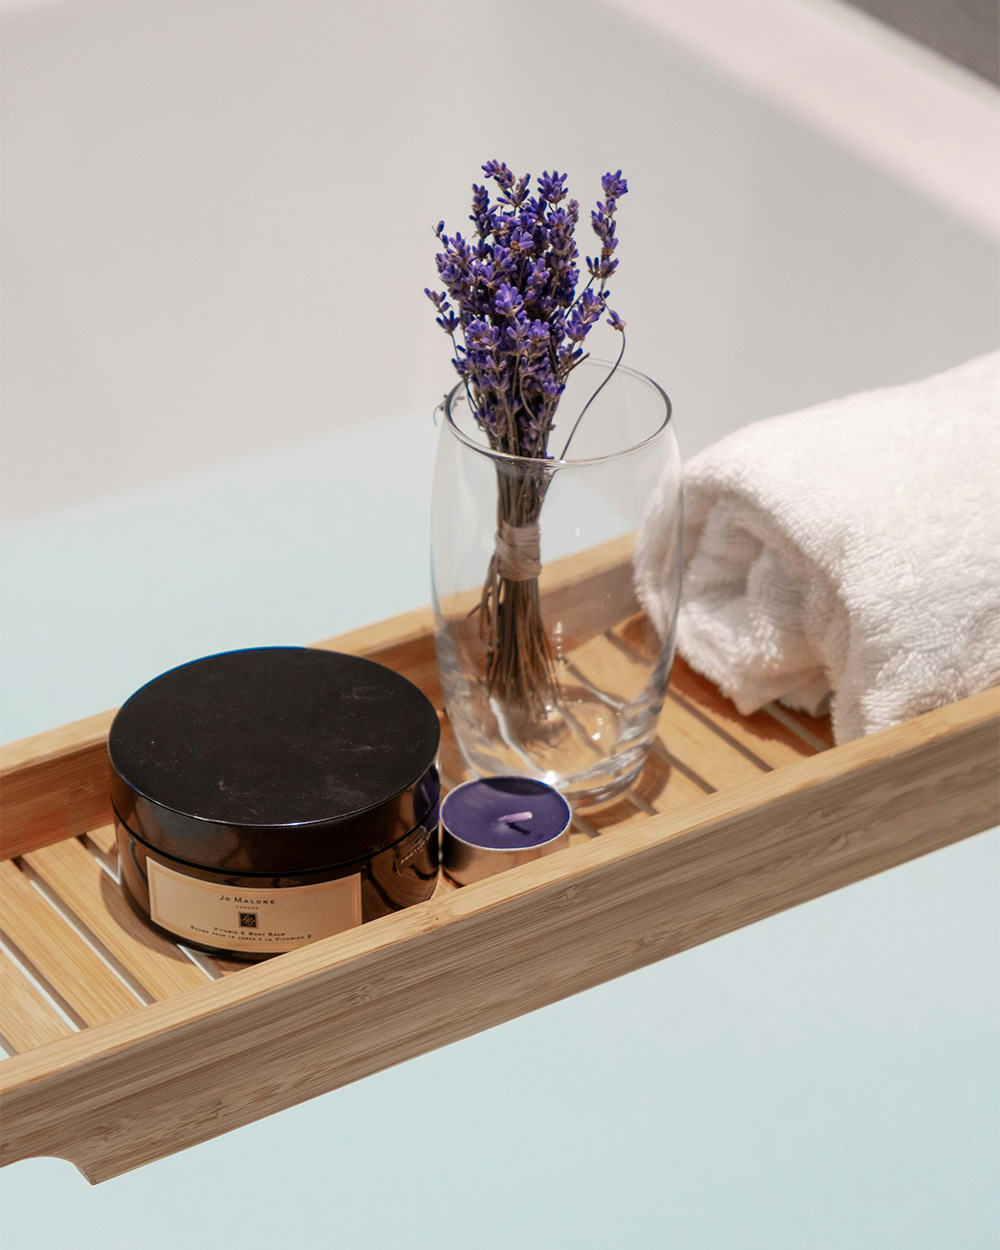 Wooden bath rack with jarred skincare, purple candle, glass vase with lavender sprigs, and rolled white towel.